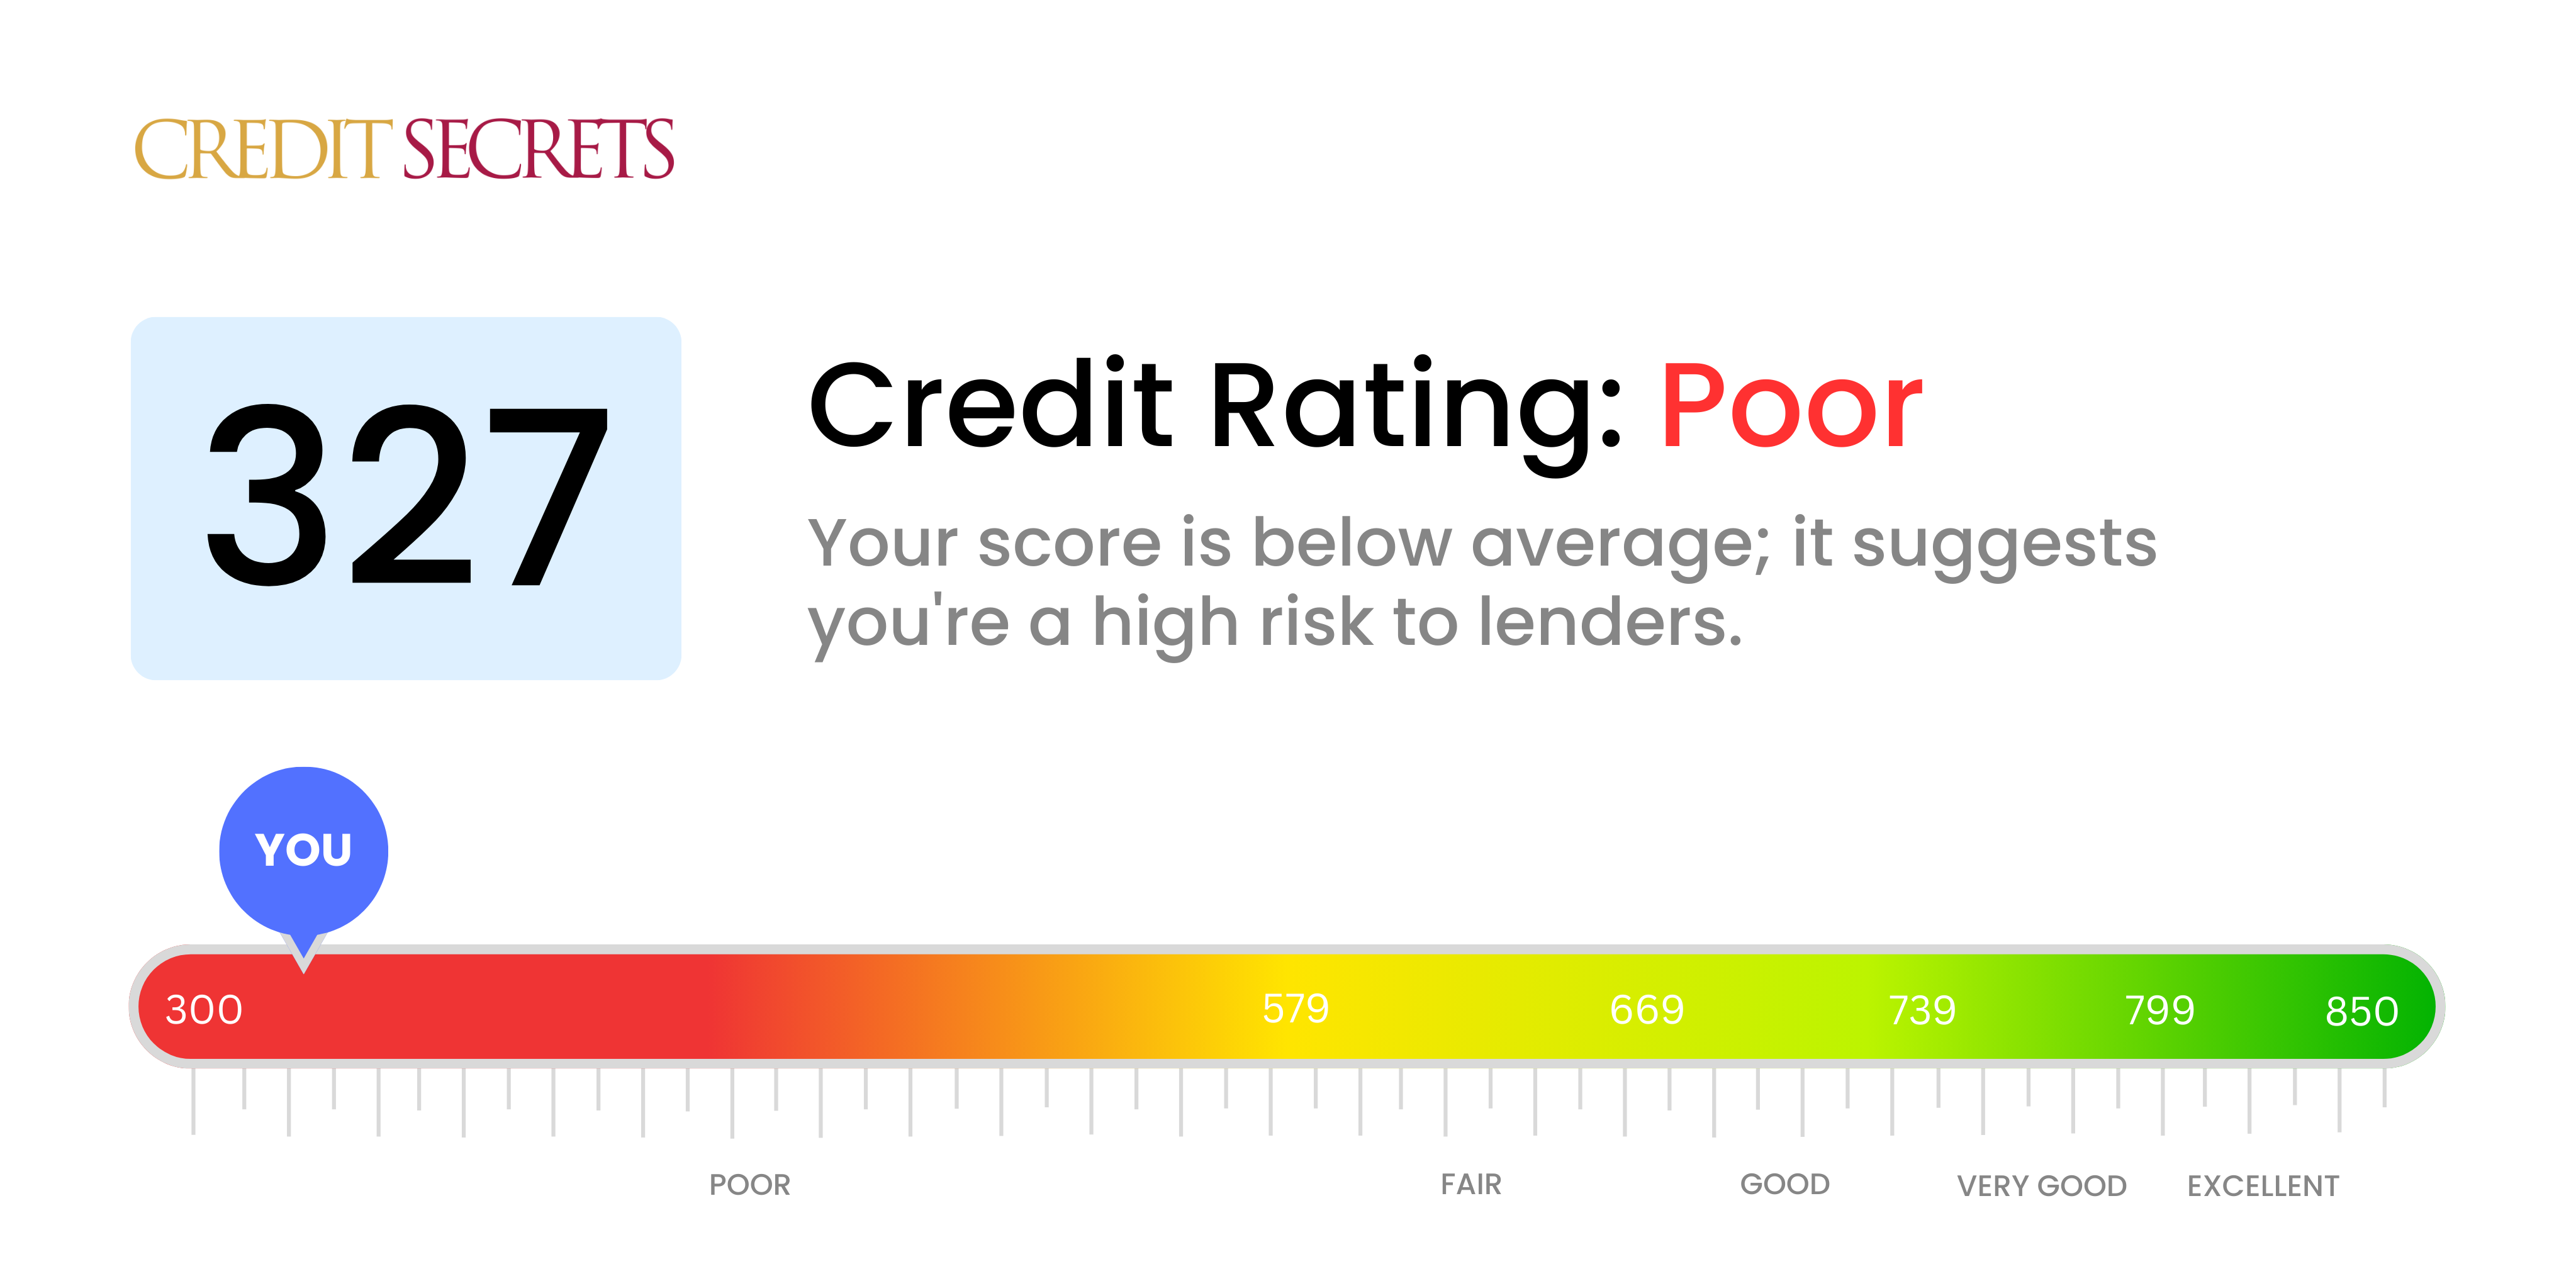 Is 327 a good credit score?